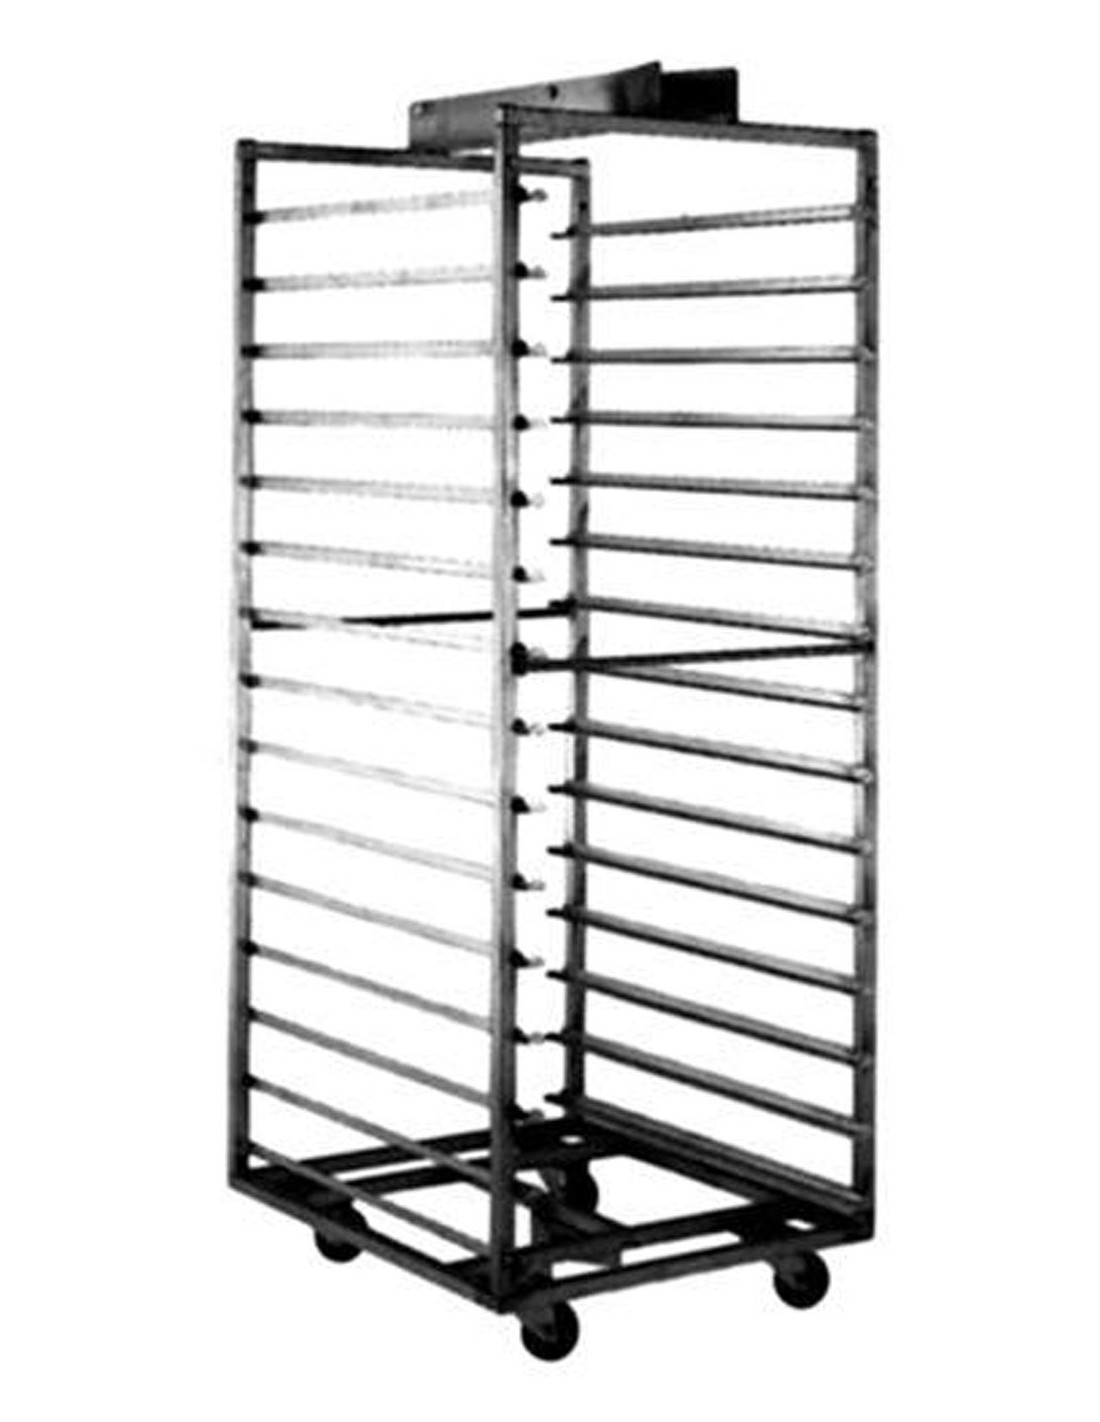 Stainless steel trolley for ovens Rotorbake T11/E11 - Capacity for trays n. 18 cm 80 x 120 - Height cm 195